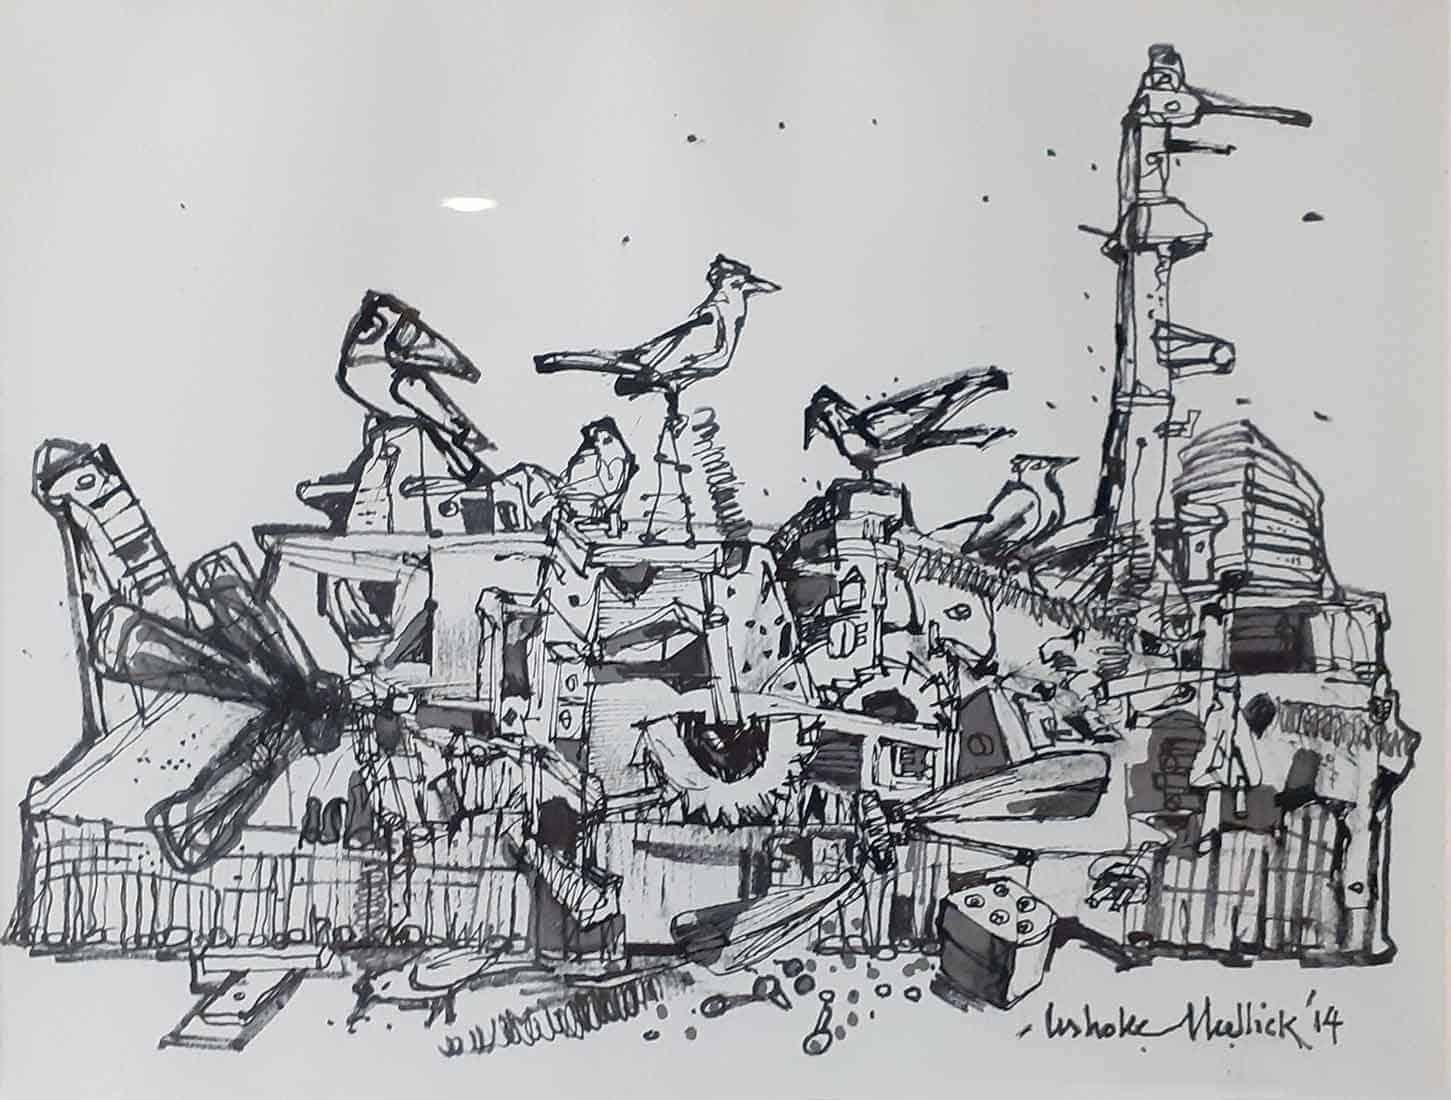 Ashoke Mullick Animal Art - City Life, Drawing, Ink on paper, Black, White by Indian Artist "In Stock"